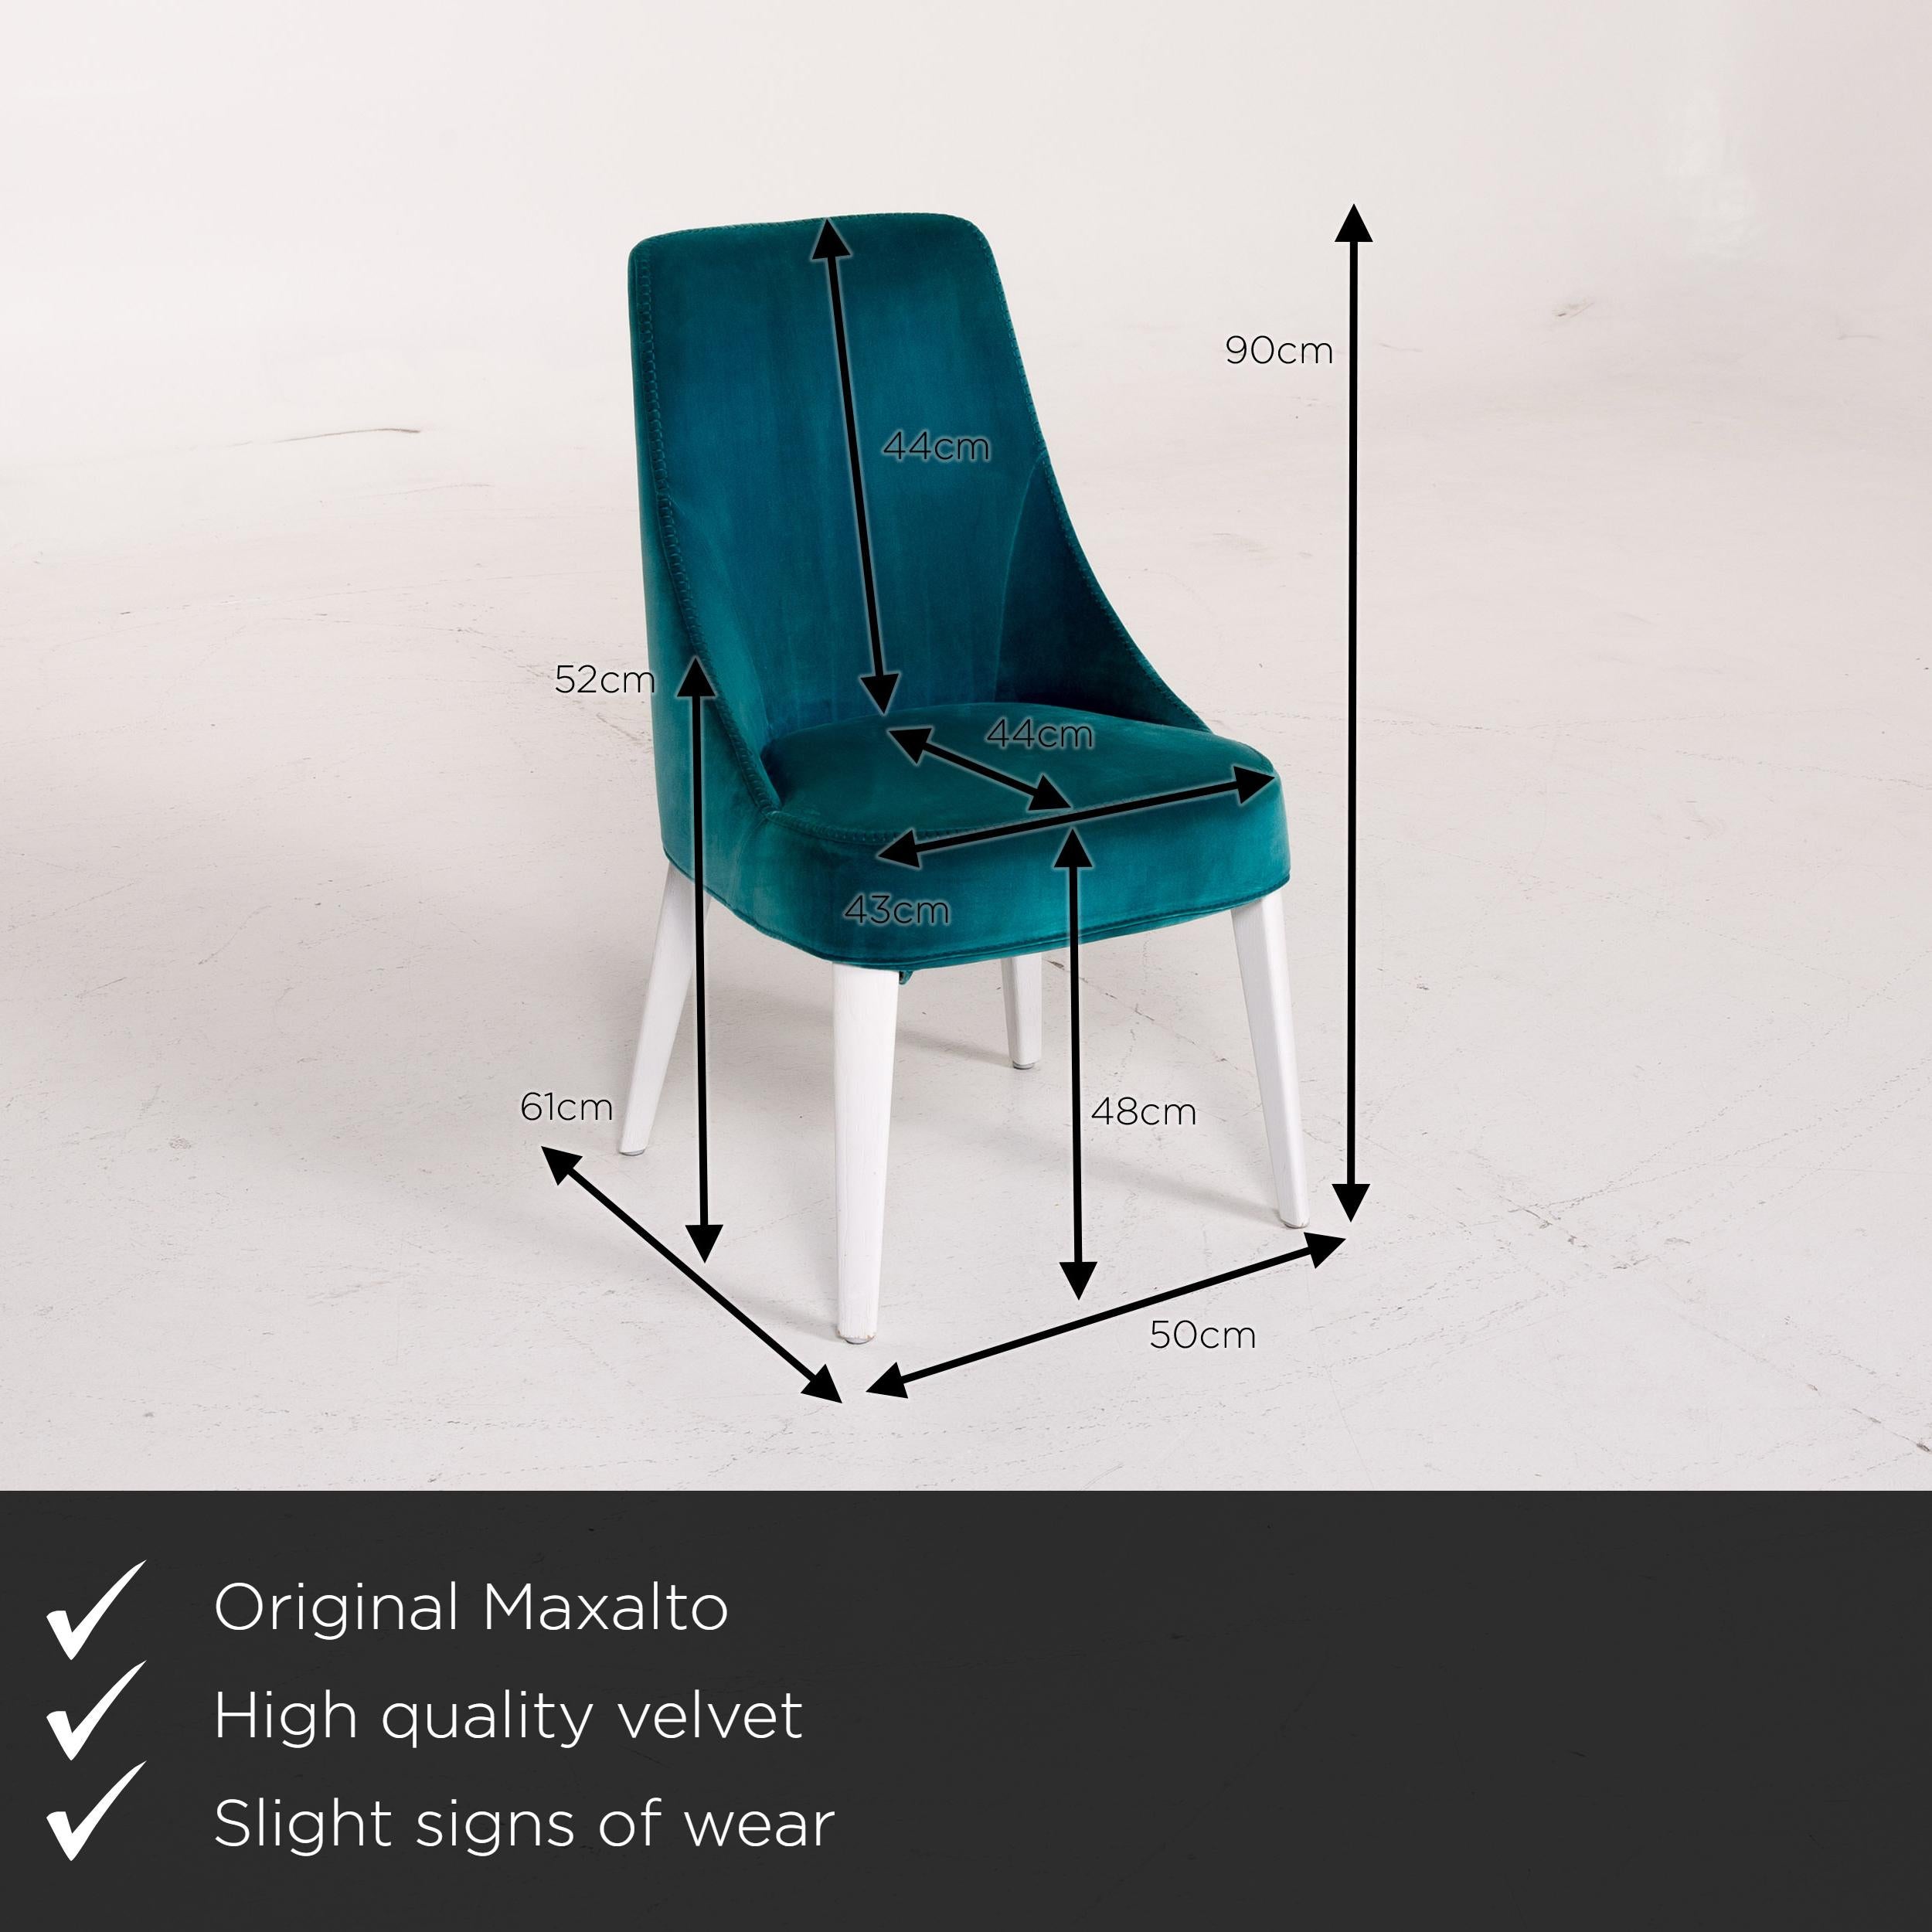 We present to you a Maxalto by B&B Italia velvet chair turquoise.


 Product measurements in centimeters:
 

Depth 61
Width 50
Height 90
Seat height 48
Rest height 52
Seat depth 44
Seat width 43
Back height 44.
 